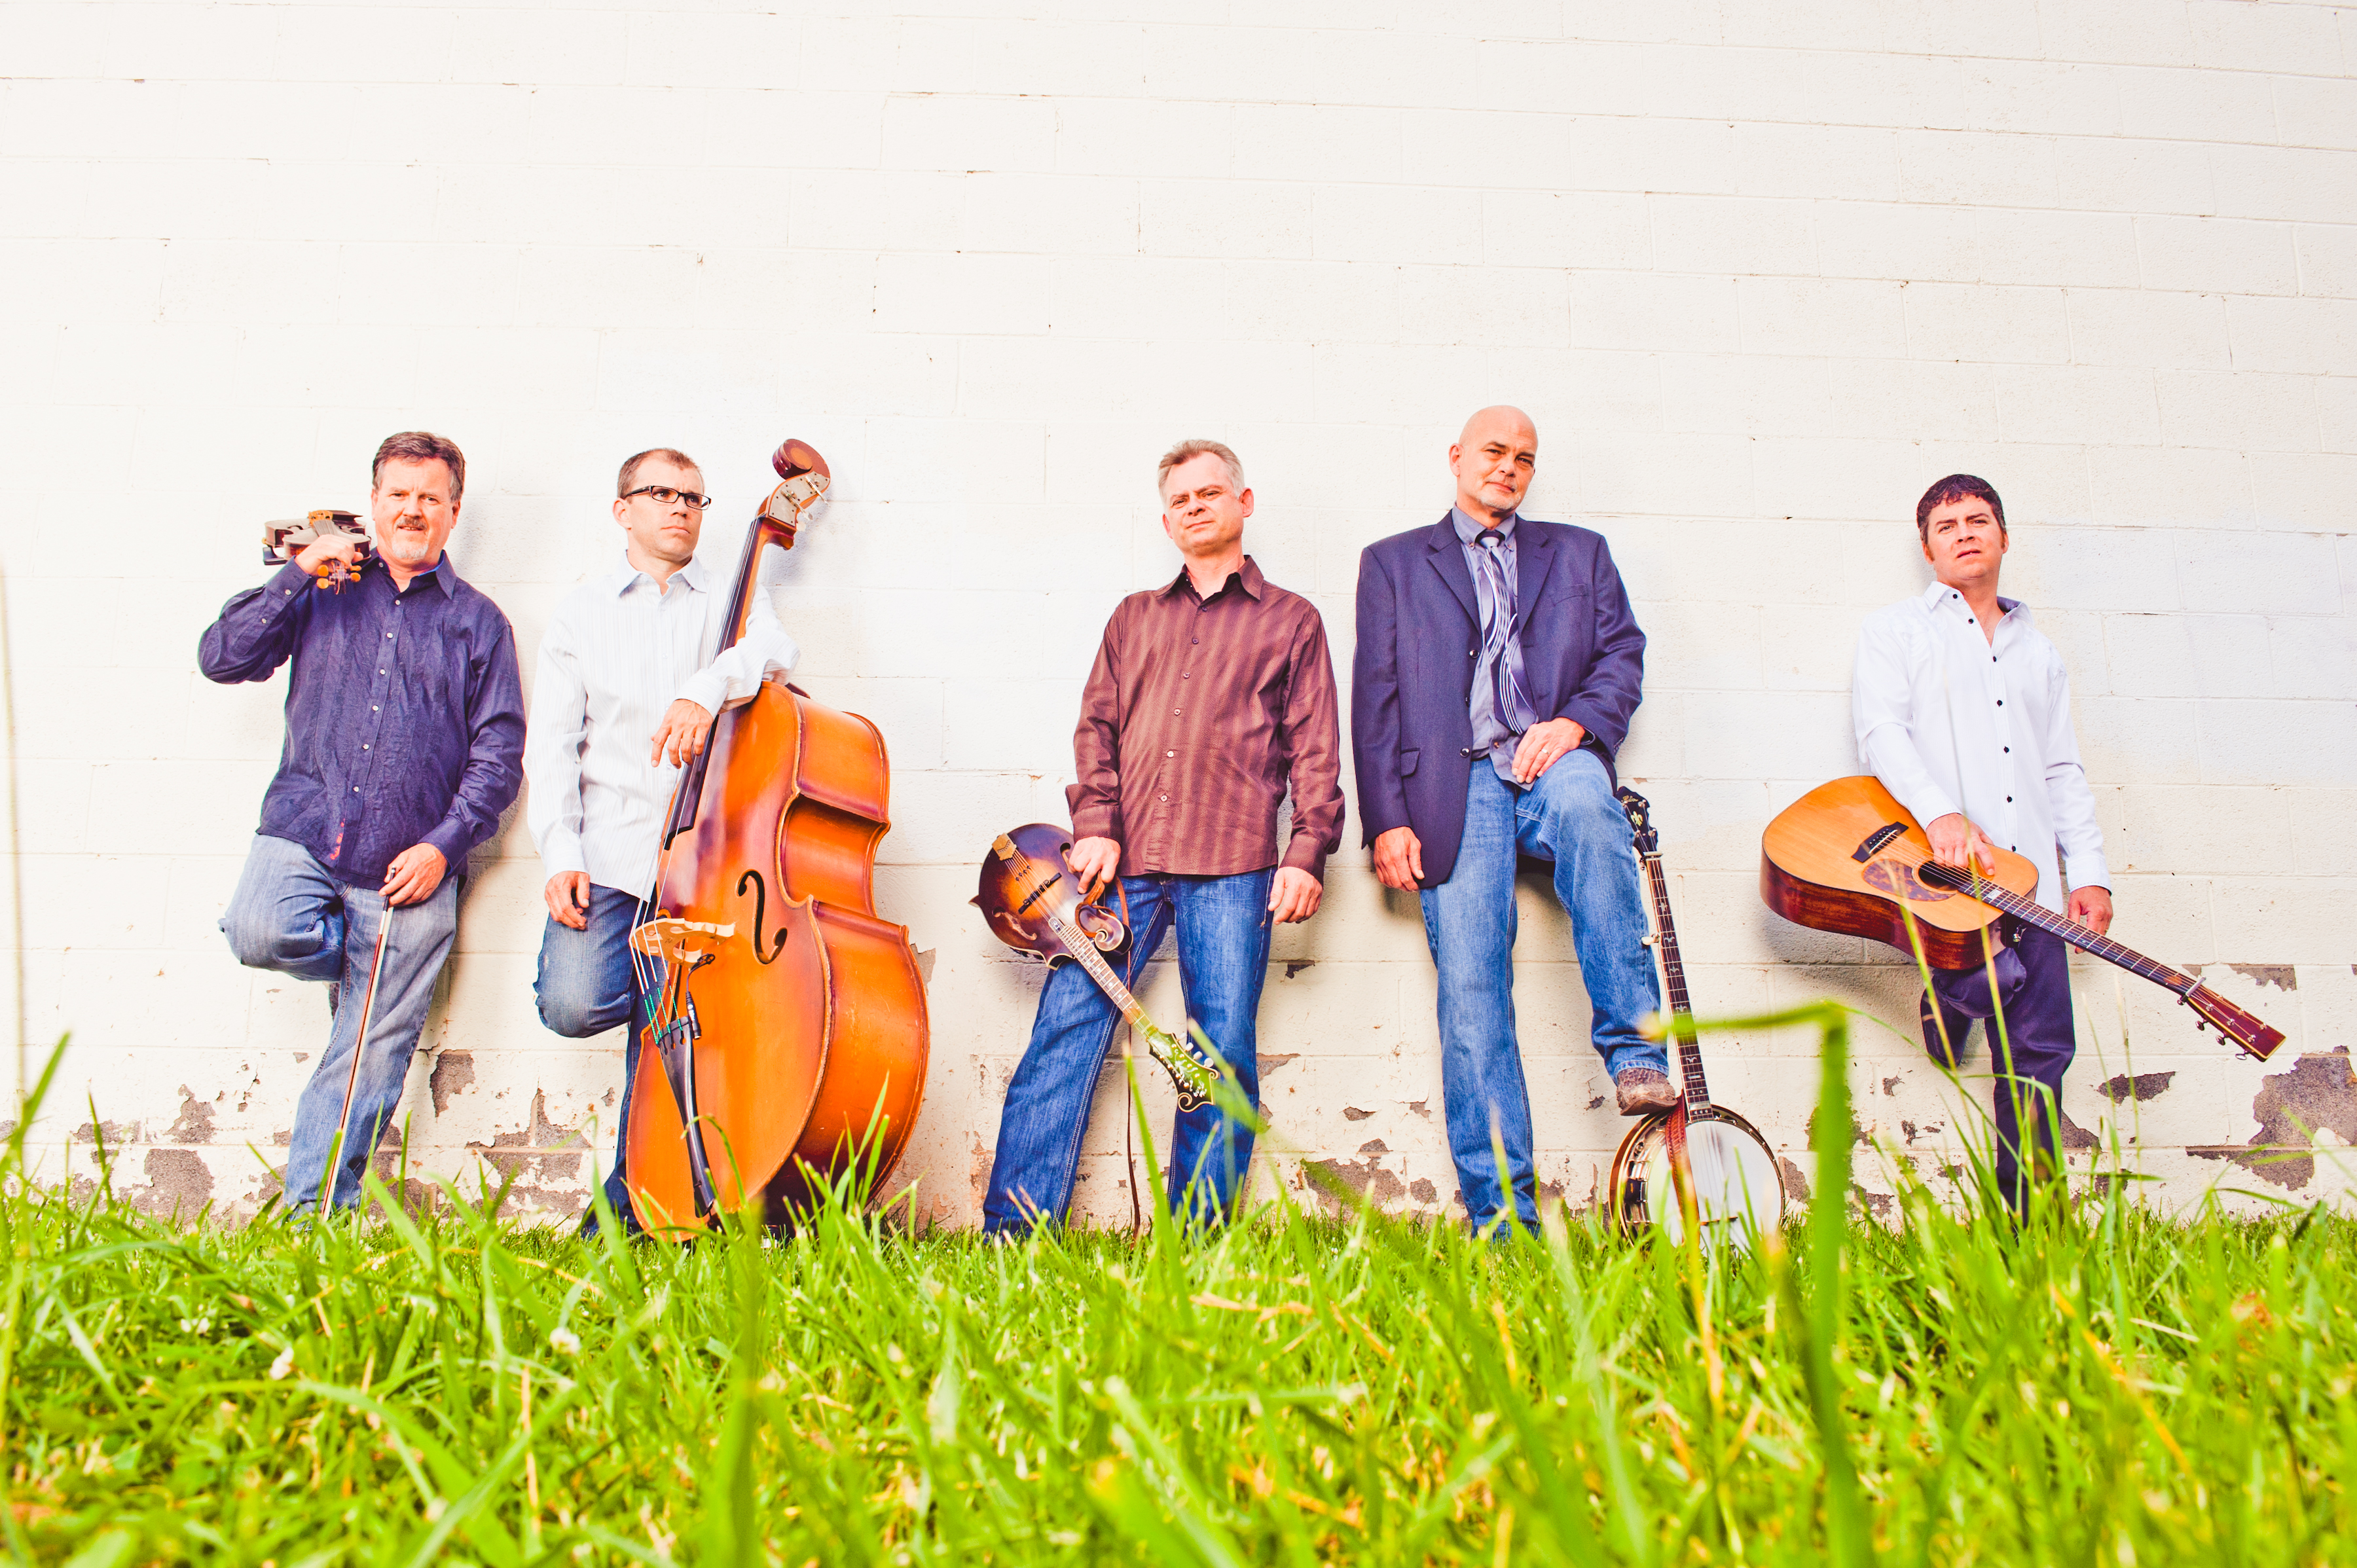 Lonesome River Band has been one of the most popular bluegrass groups since the release of its breakout CD, Carrying The Tradition, back in 1991.